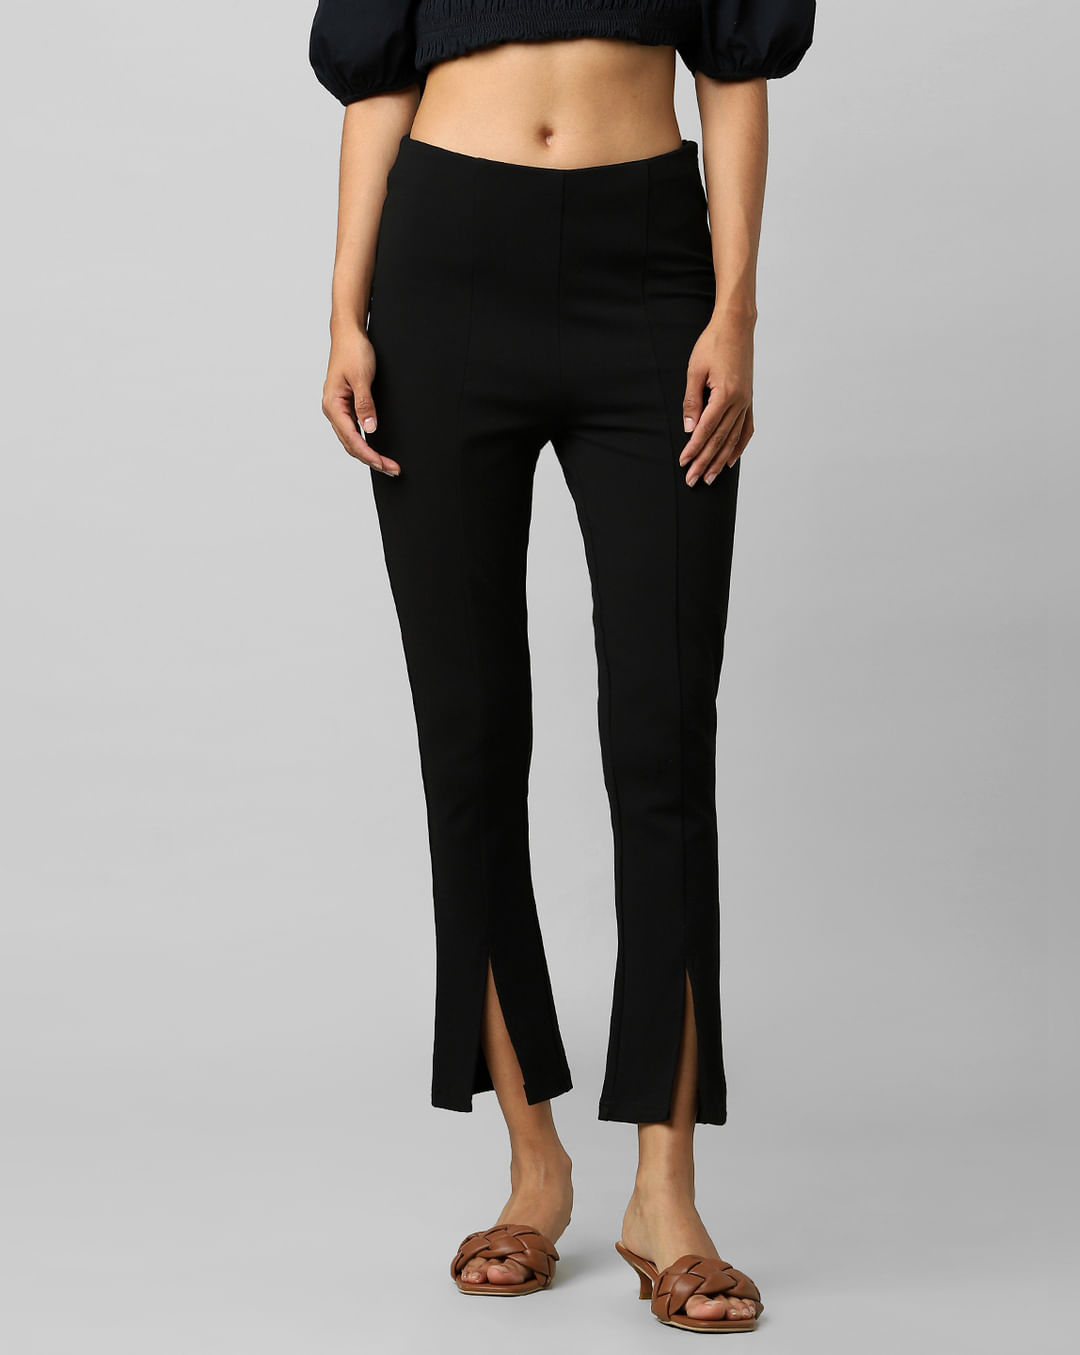 Black High Waist Women Flare Leggings, Party Wear, Slim Fit at Rs 375 in  Ahmedabad